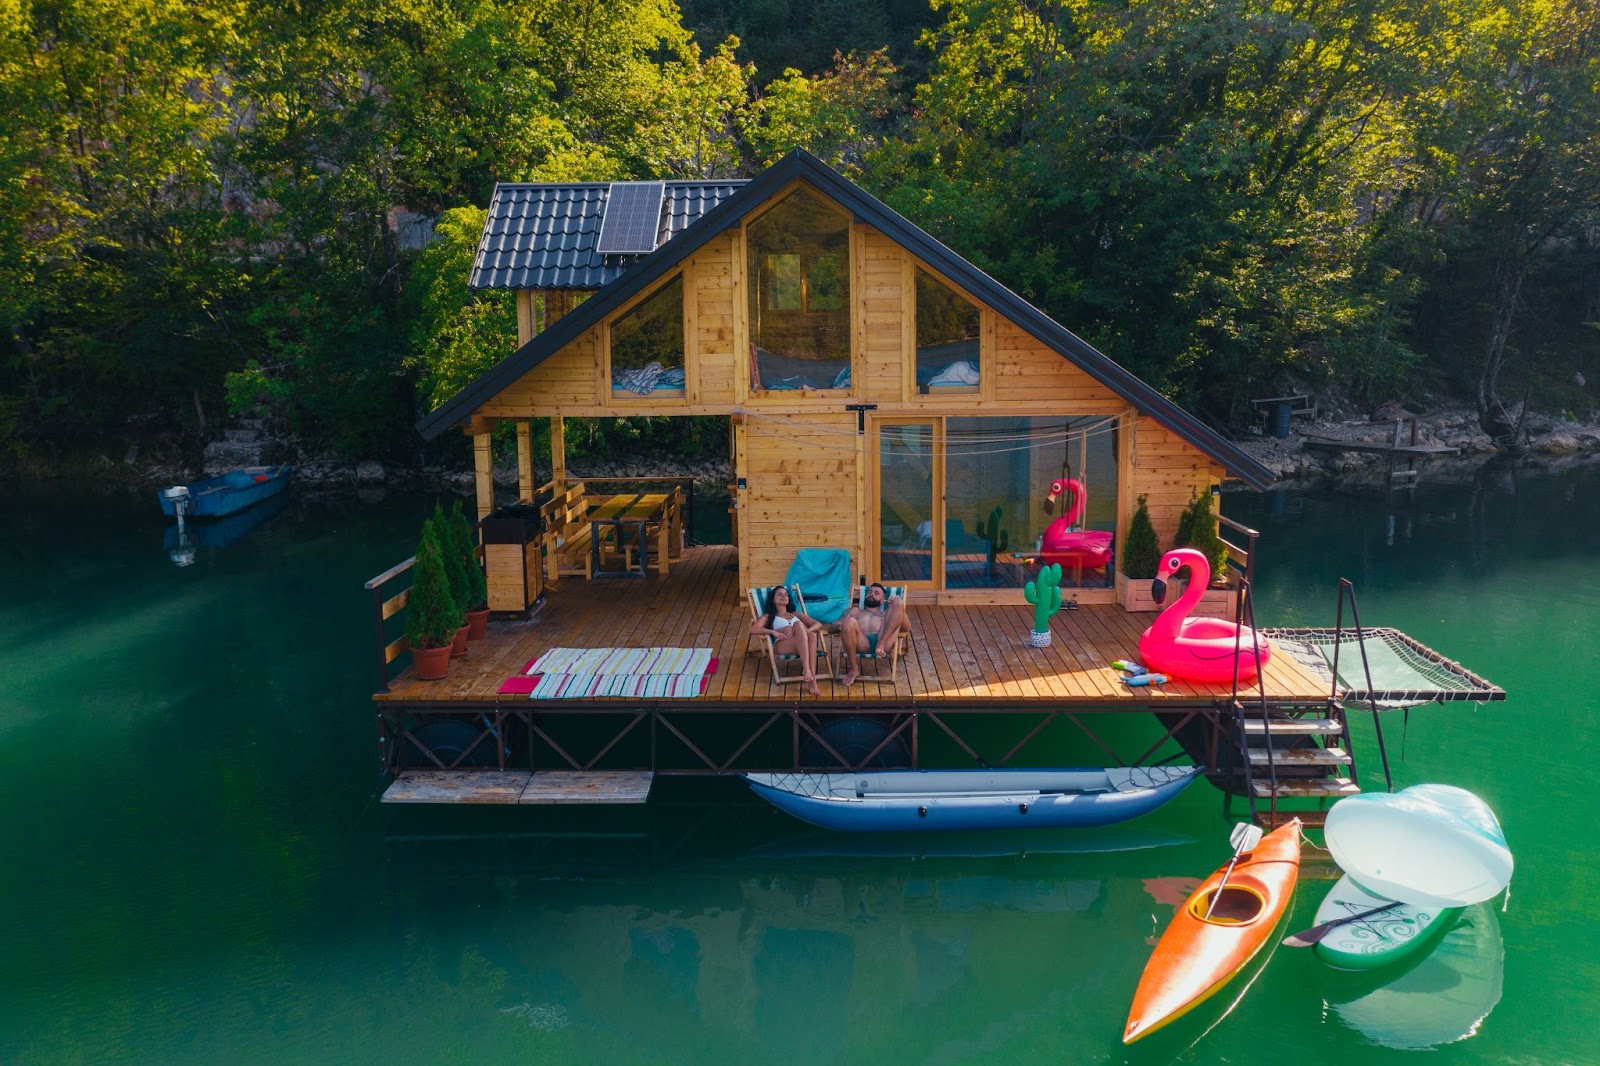 A floating house with a deck overlooking a pond, a small boat, and duck-shaped inflatable floaters.